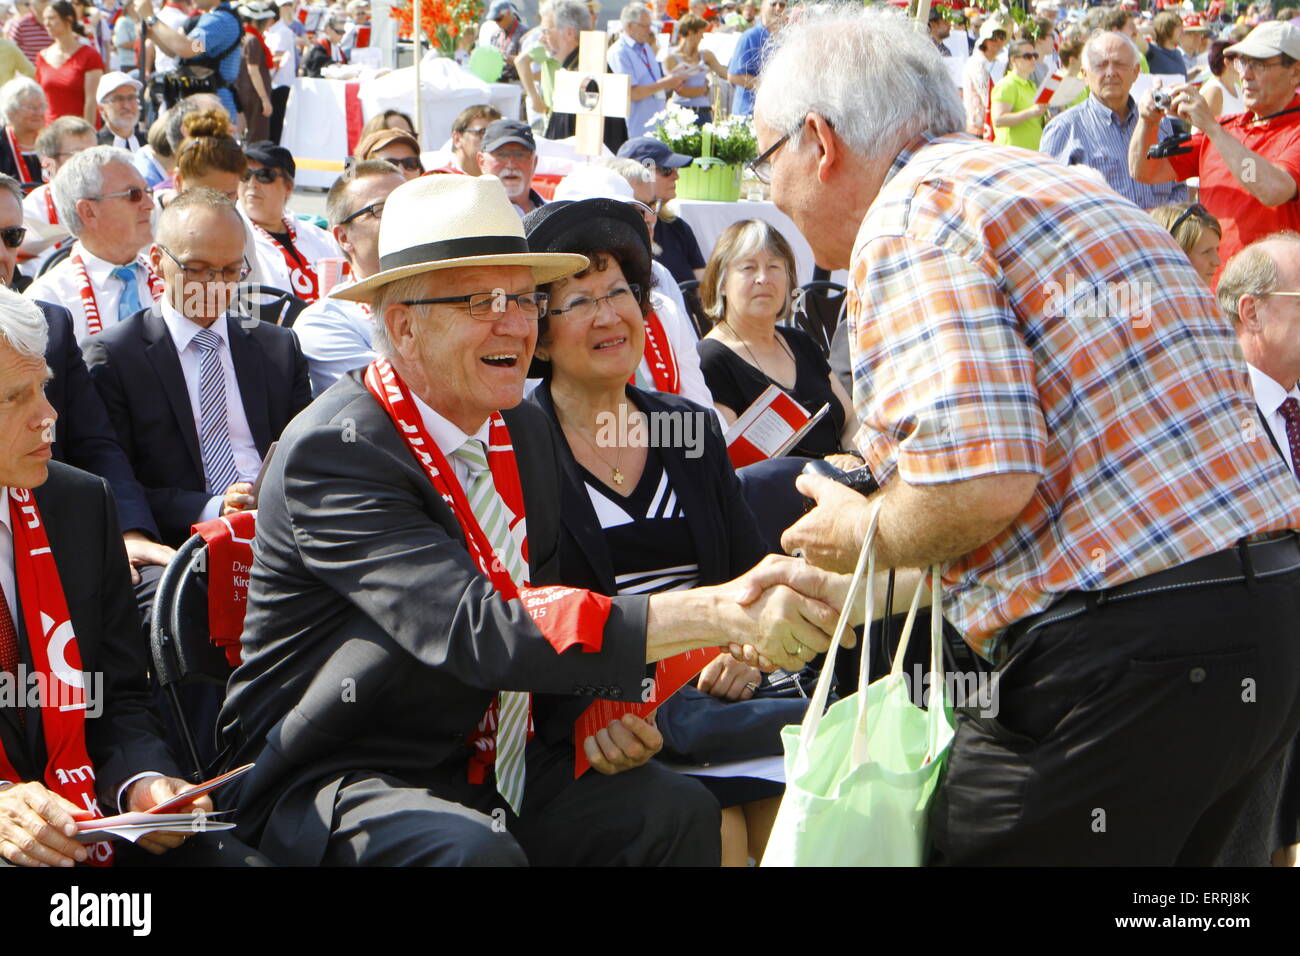 A man shakes the hand of Winfried Kretschmann (left0, the Minister-President of Baden-Württemberg, at the closing ceremony of the 35th German Protestant Church Congress. © Michael Debets/Pacific Press/Alamy Live News Stock Photo